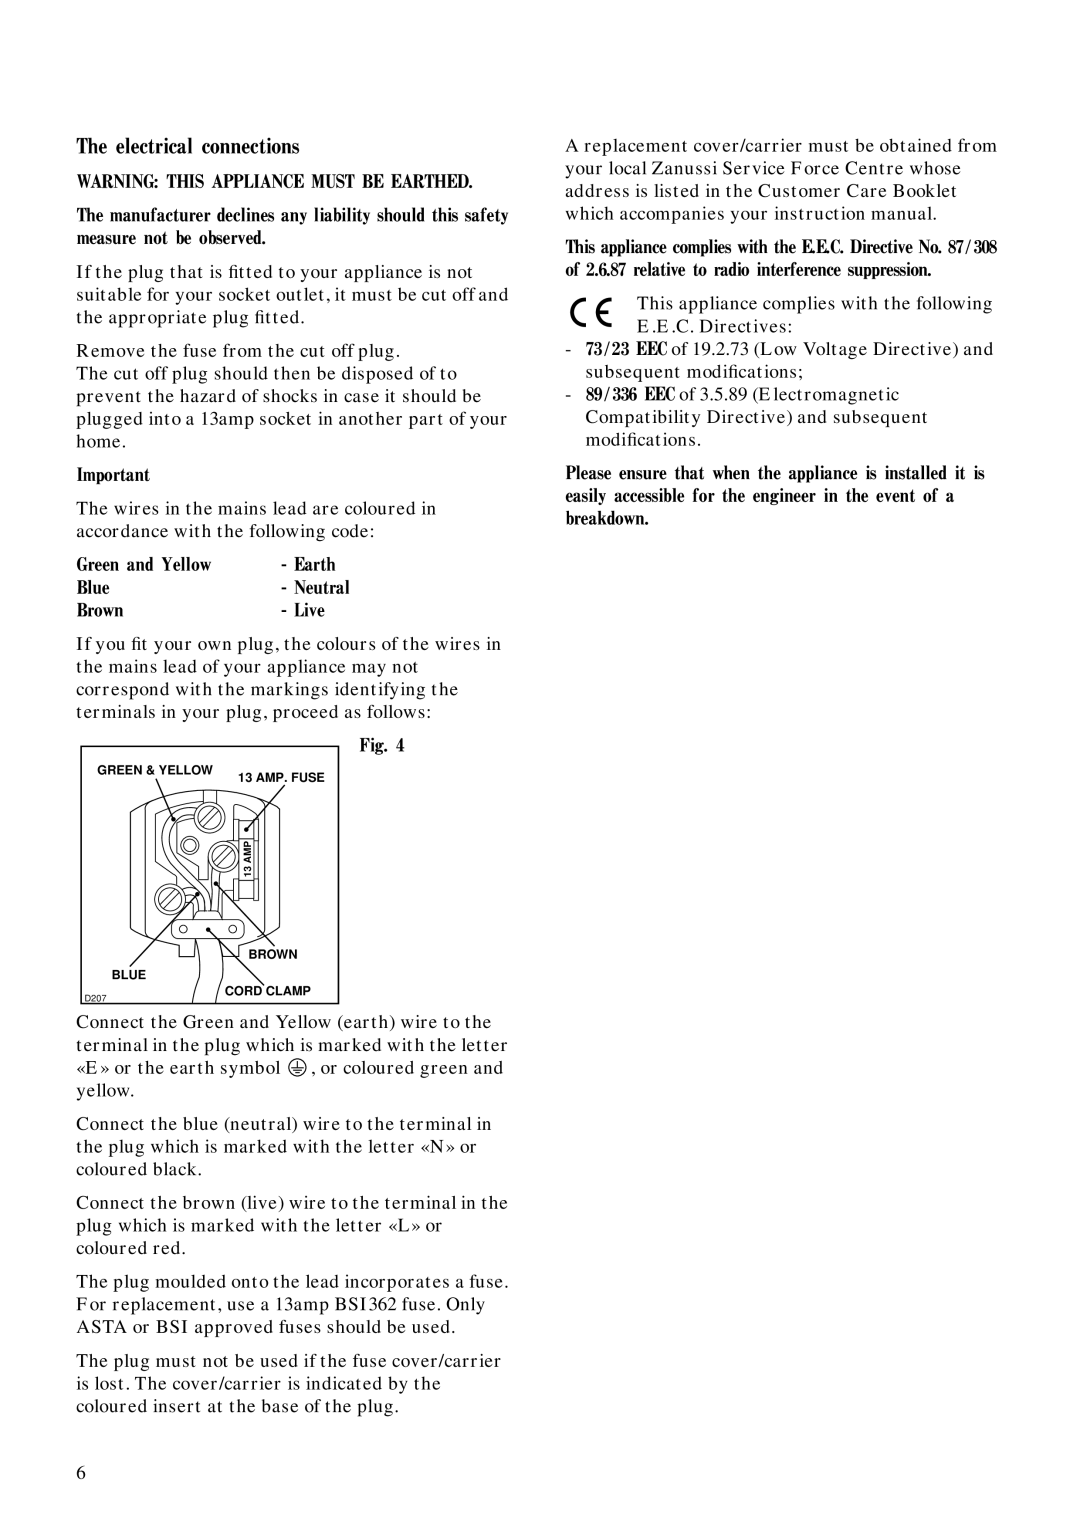 Zanussi ZFC 66/14 manual The electrical connections 